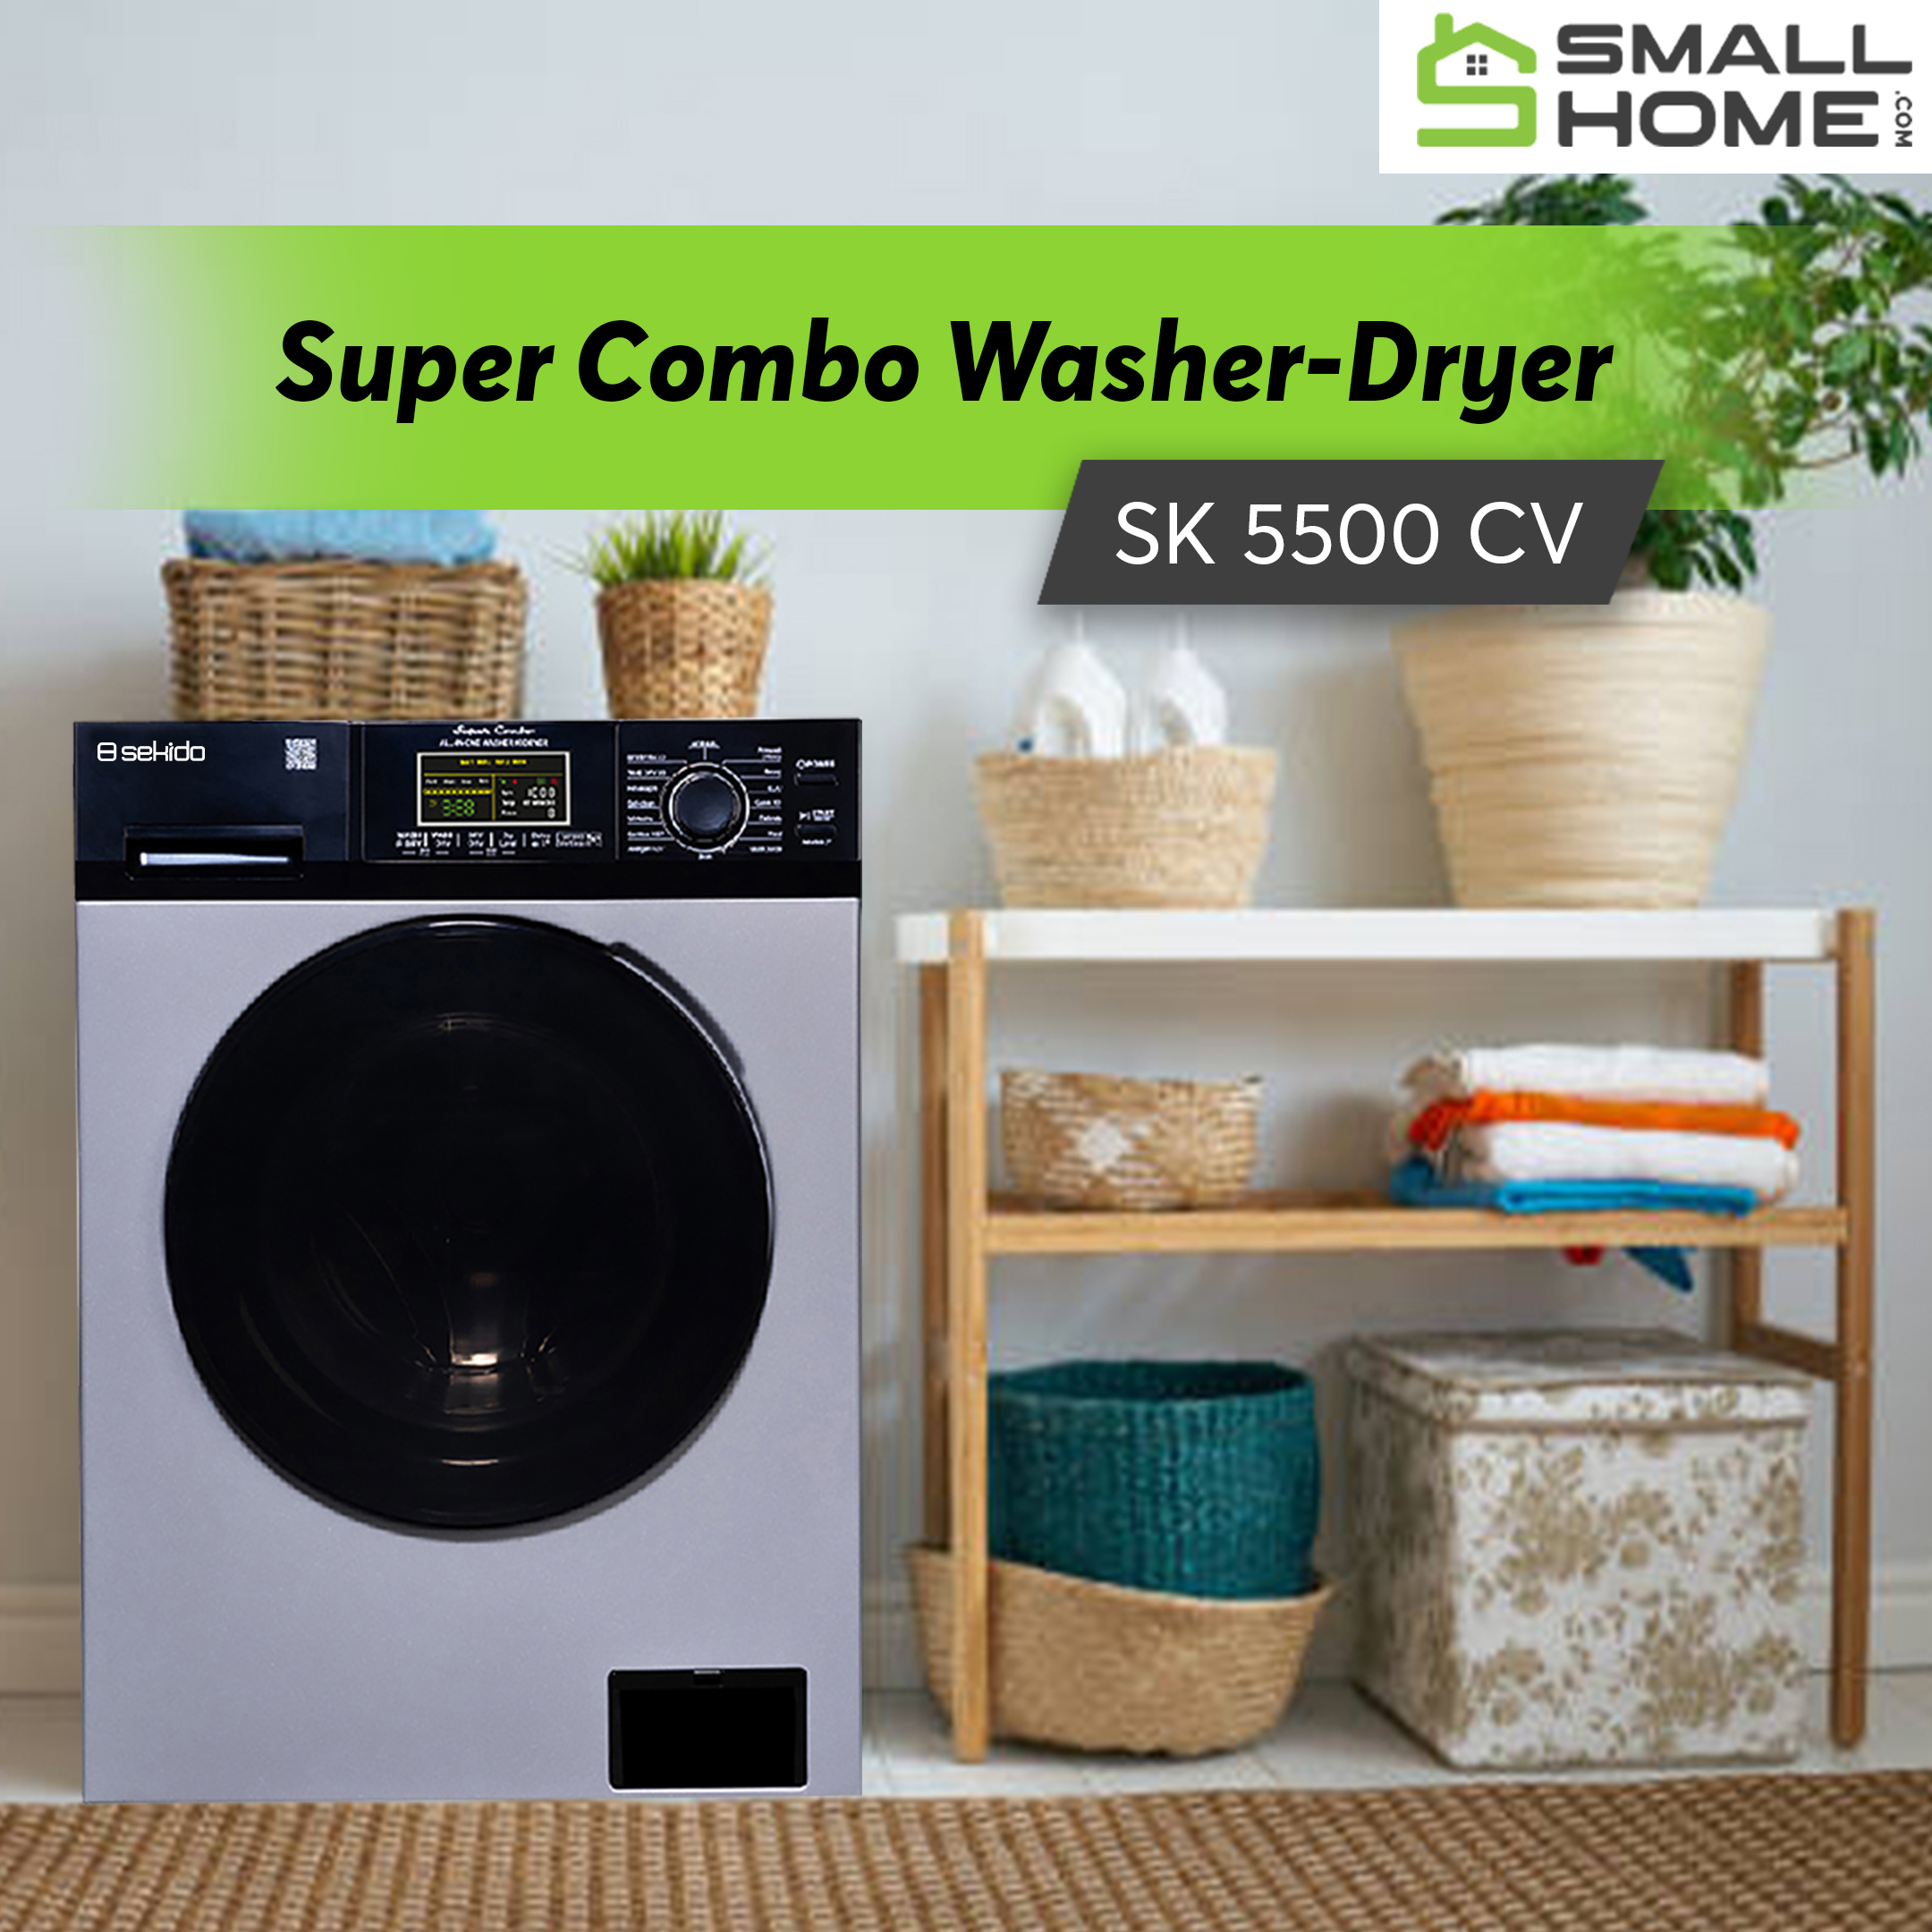 Magic Chef Washer Dyer Comb